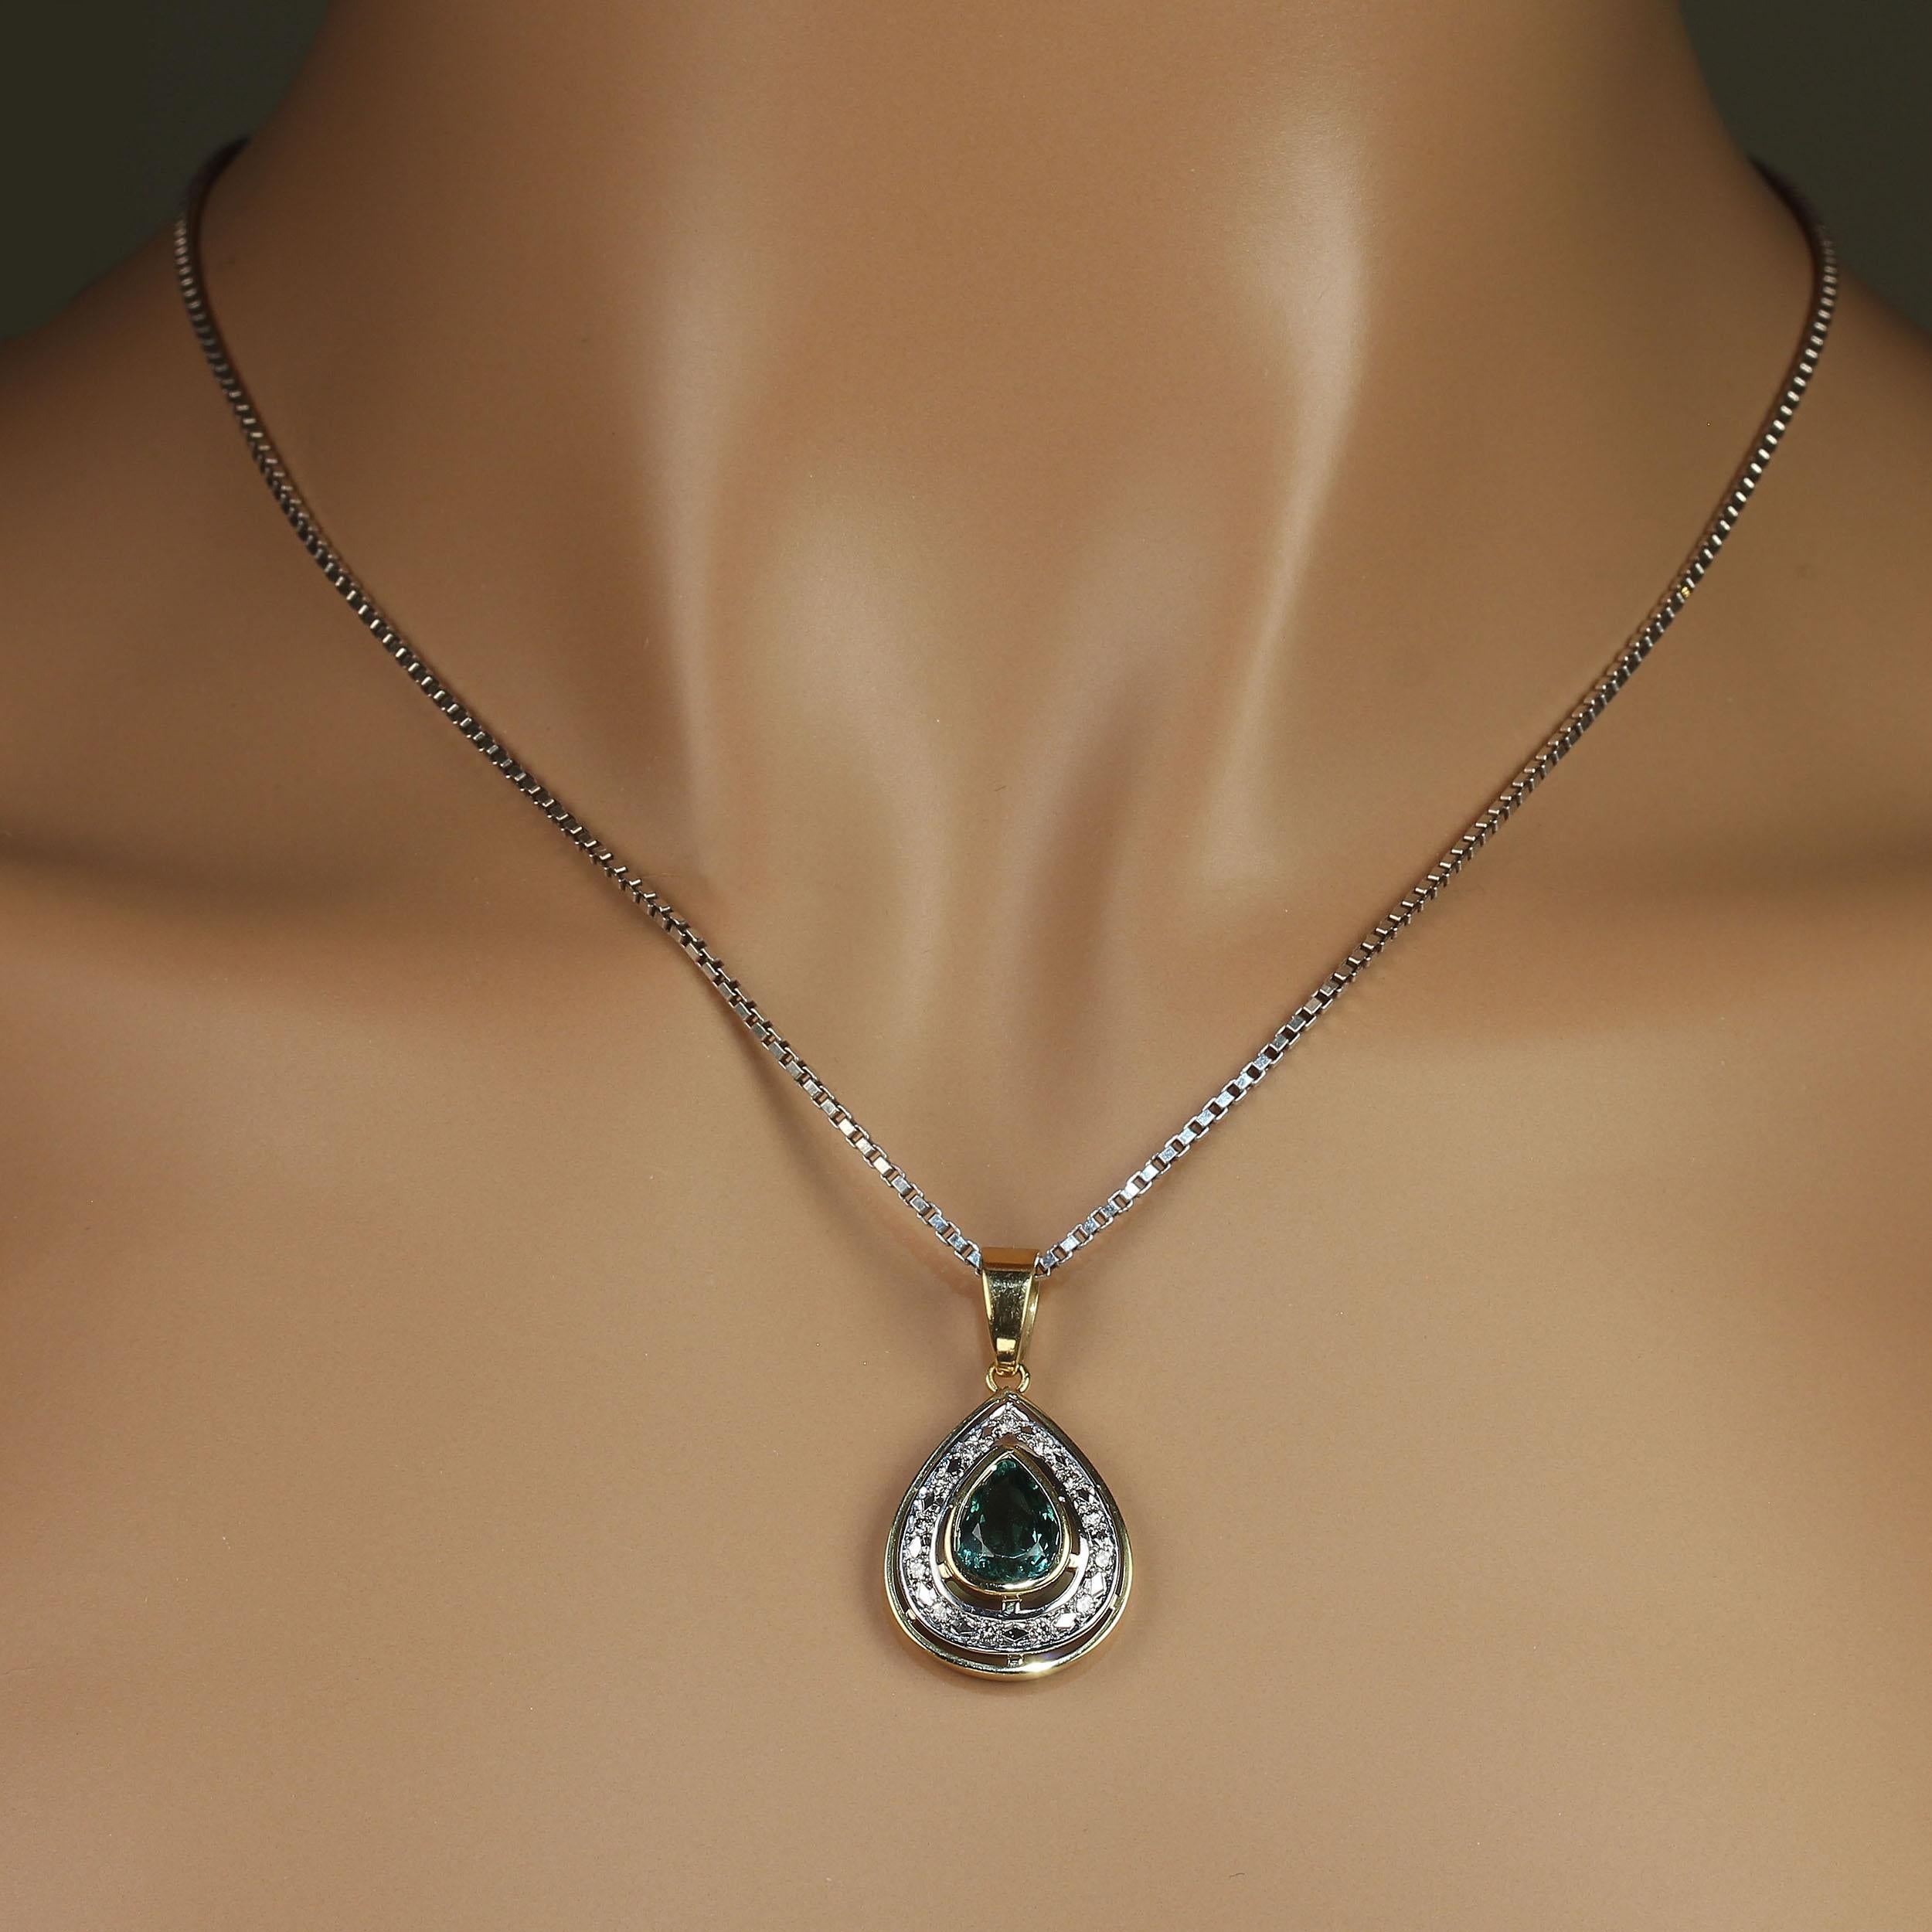 So much pizazz in this pendant! A gorgeous pear shaped, bezel set sparkling Green Quartz is the center of this unique pendant. That is encircled with row of diamonds in white gold, and then another edge of yellow gold. This Brazilian hand made 18K